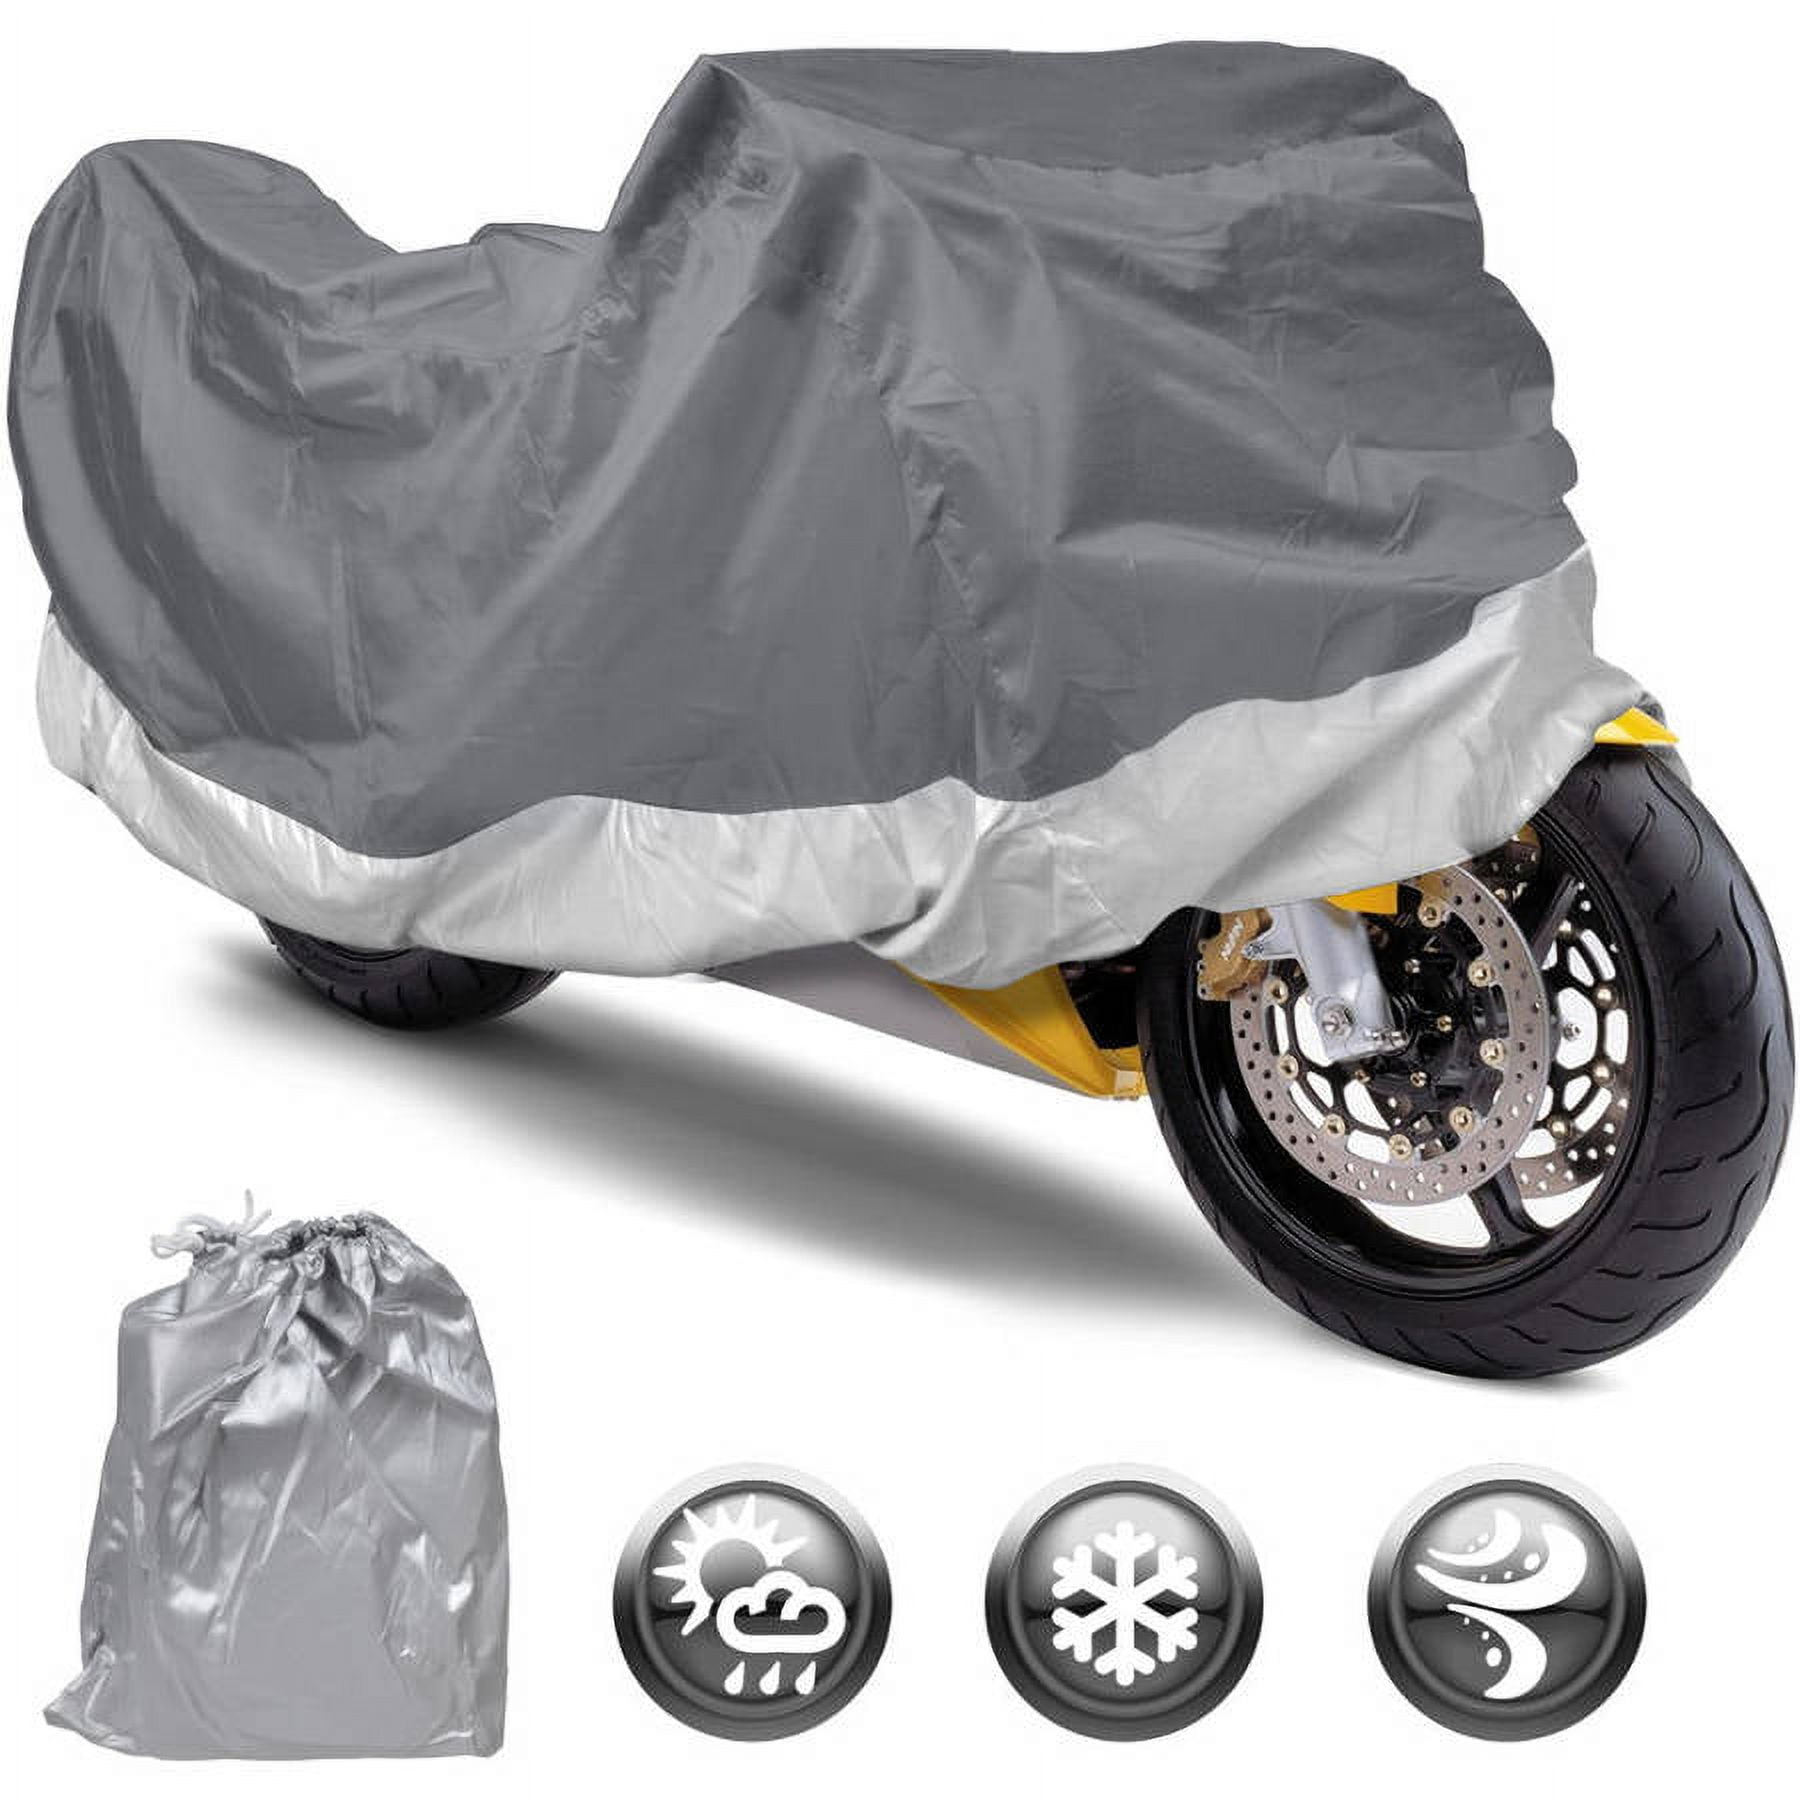 Motorcycle Cover Waterproof Outdoor Motorbike All-Weather Protection, Small  (72 Inch) 